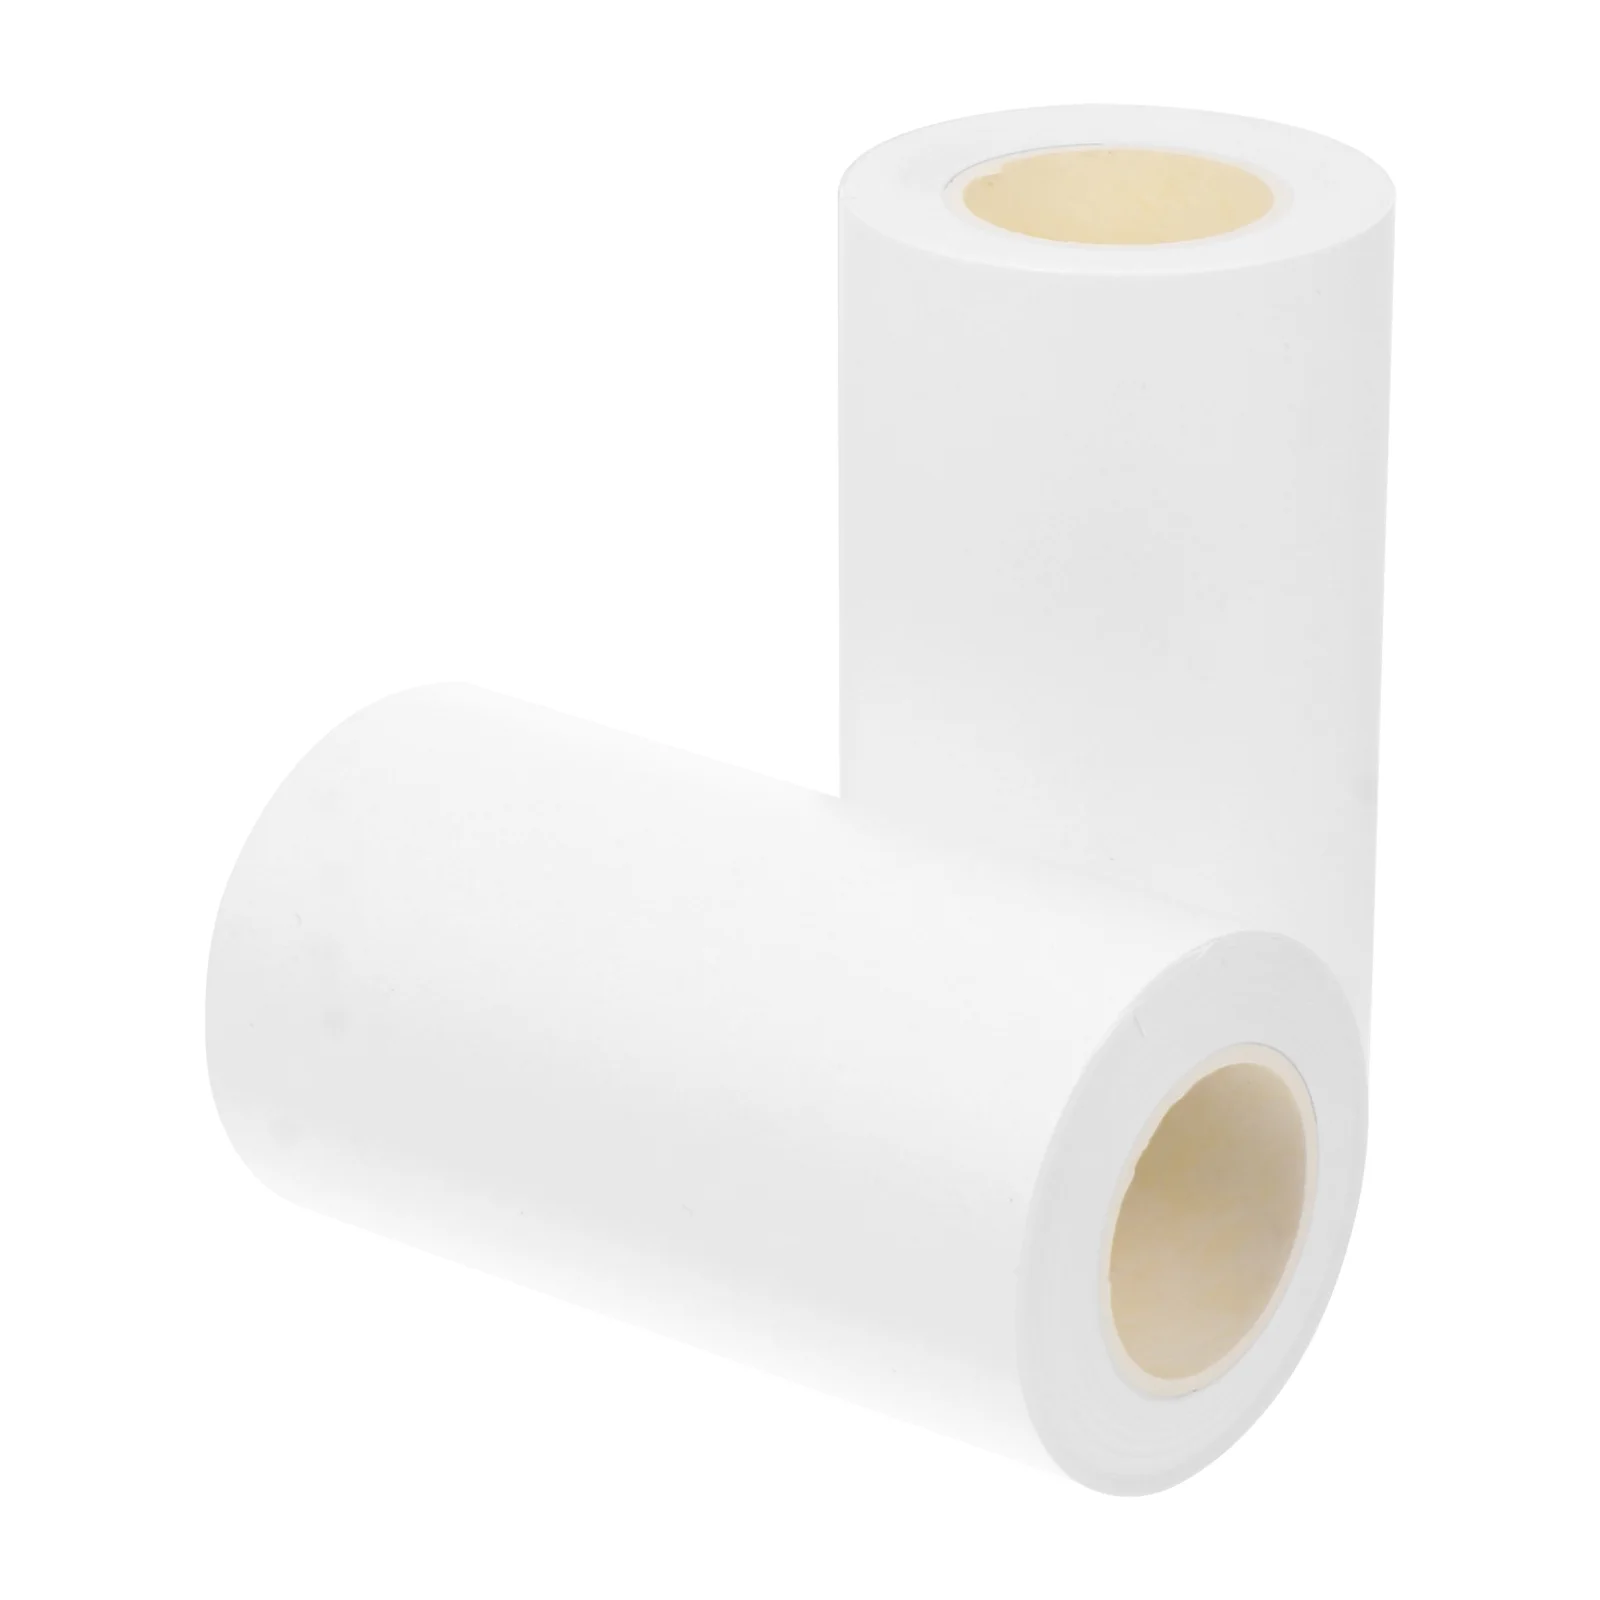 2 Rolls Double- Sided Release Paper Non- Stick Release Paper Blank Release Paper